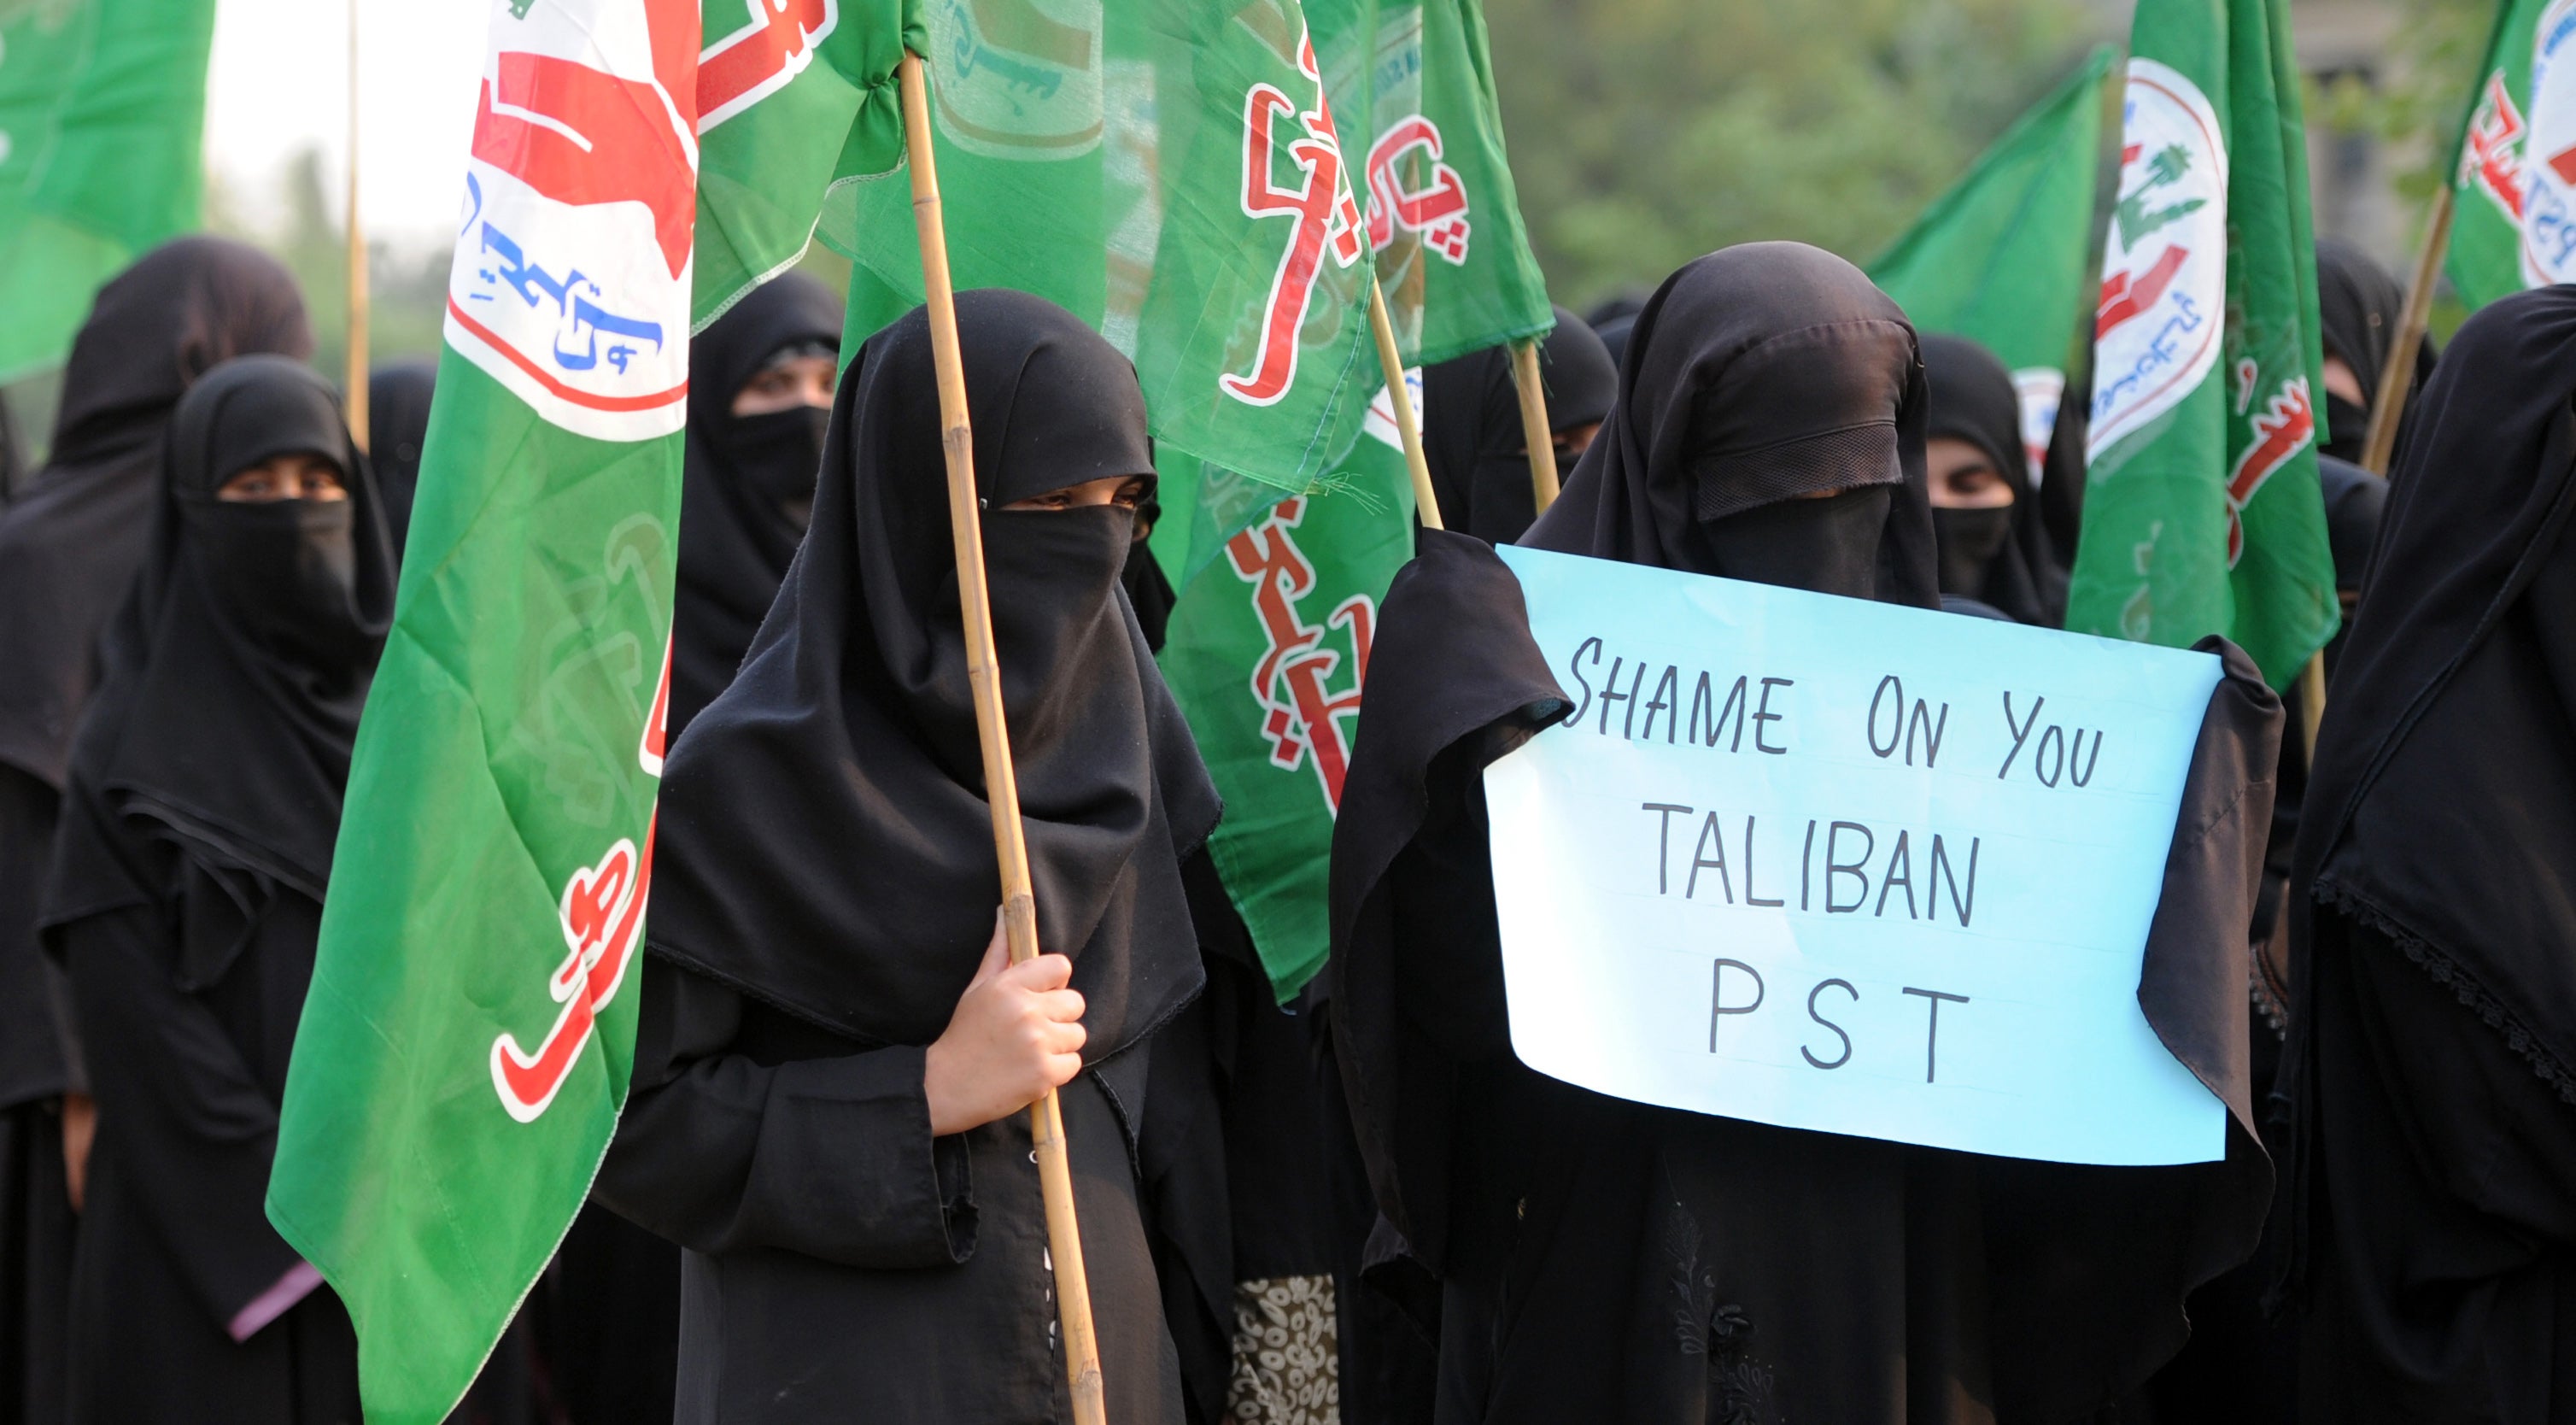 File image: A Pakistani veiled activist of an Islamic Sunni Tehreek party carries a placard during a protest against the assassination attempt by Taliban on activist Malala Yousafzai, in Islamabad on October 14, 2012